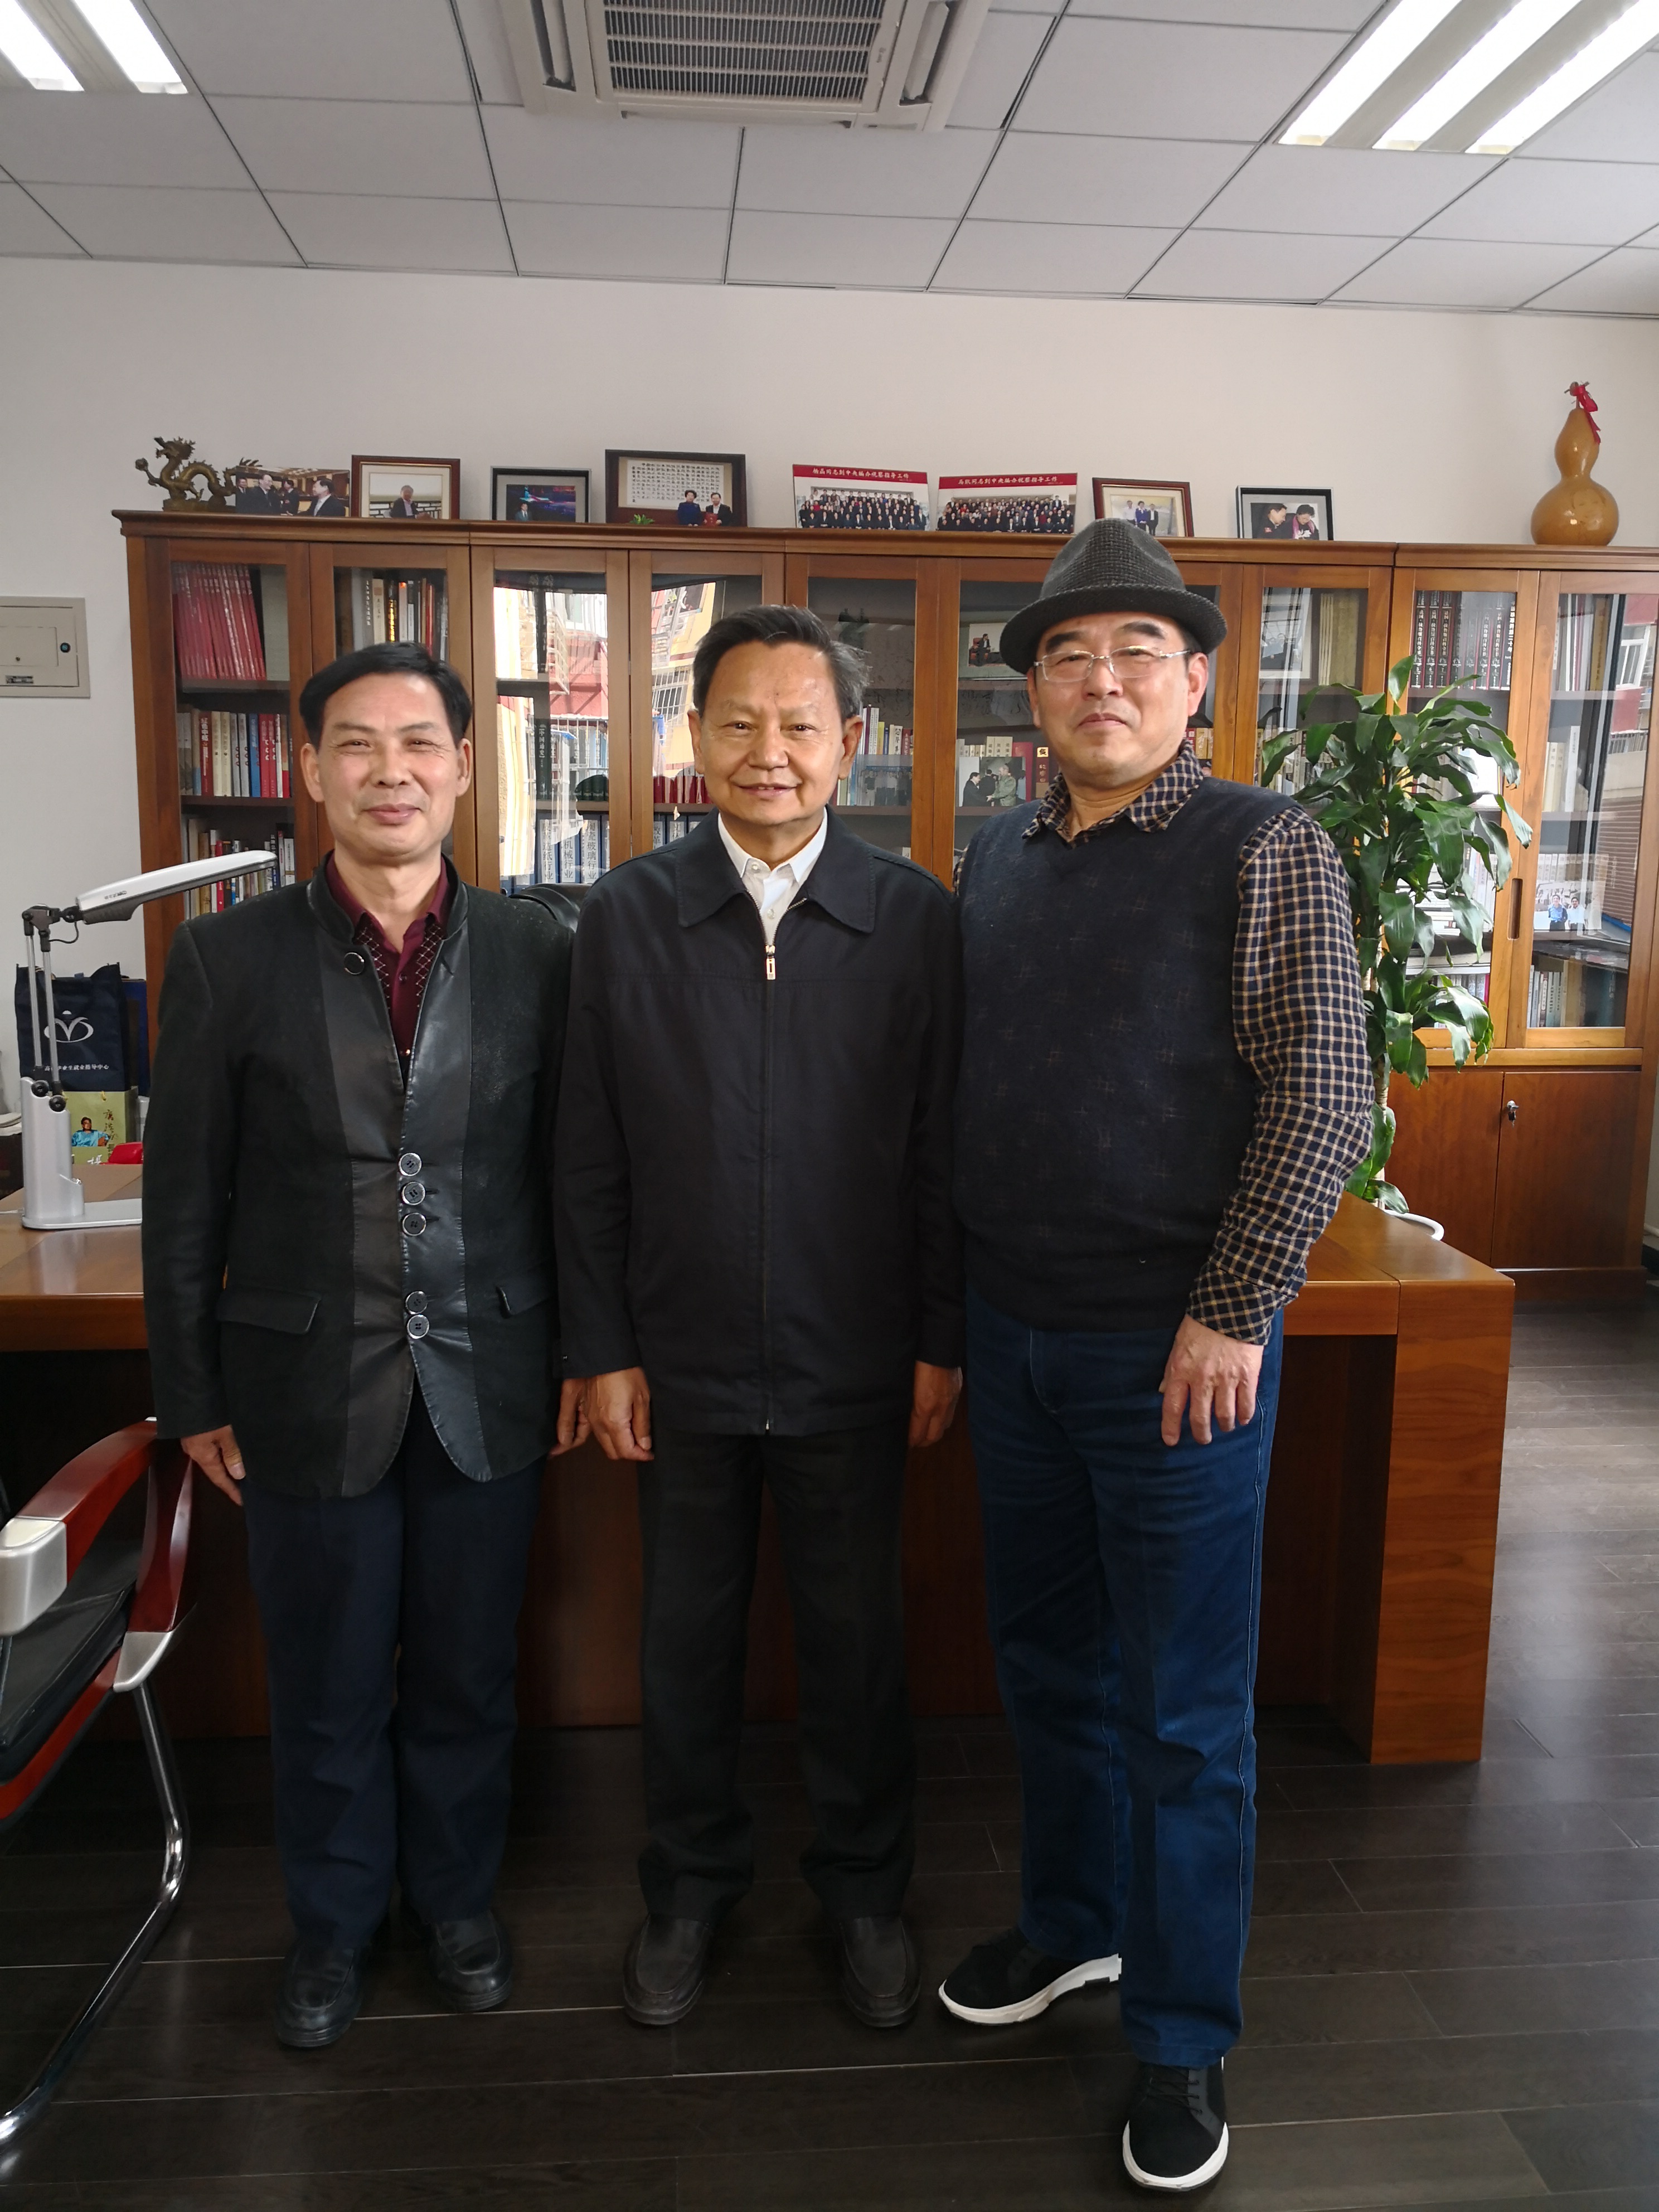 Company founder Yi Xianzao, along with Zhang Chonghe (center), President of China Light Industry Federation, and Liu Xiaoming (right), President of Hunan Light Industry Federation